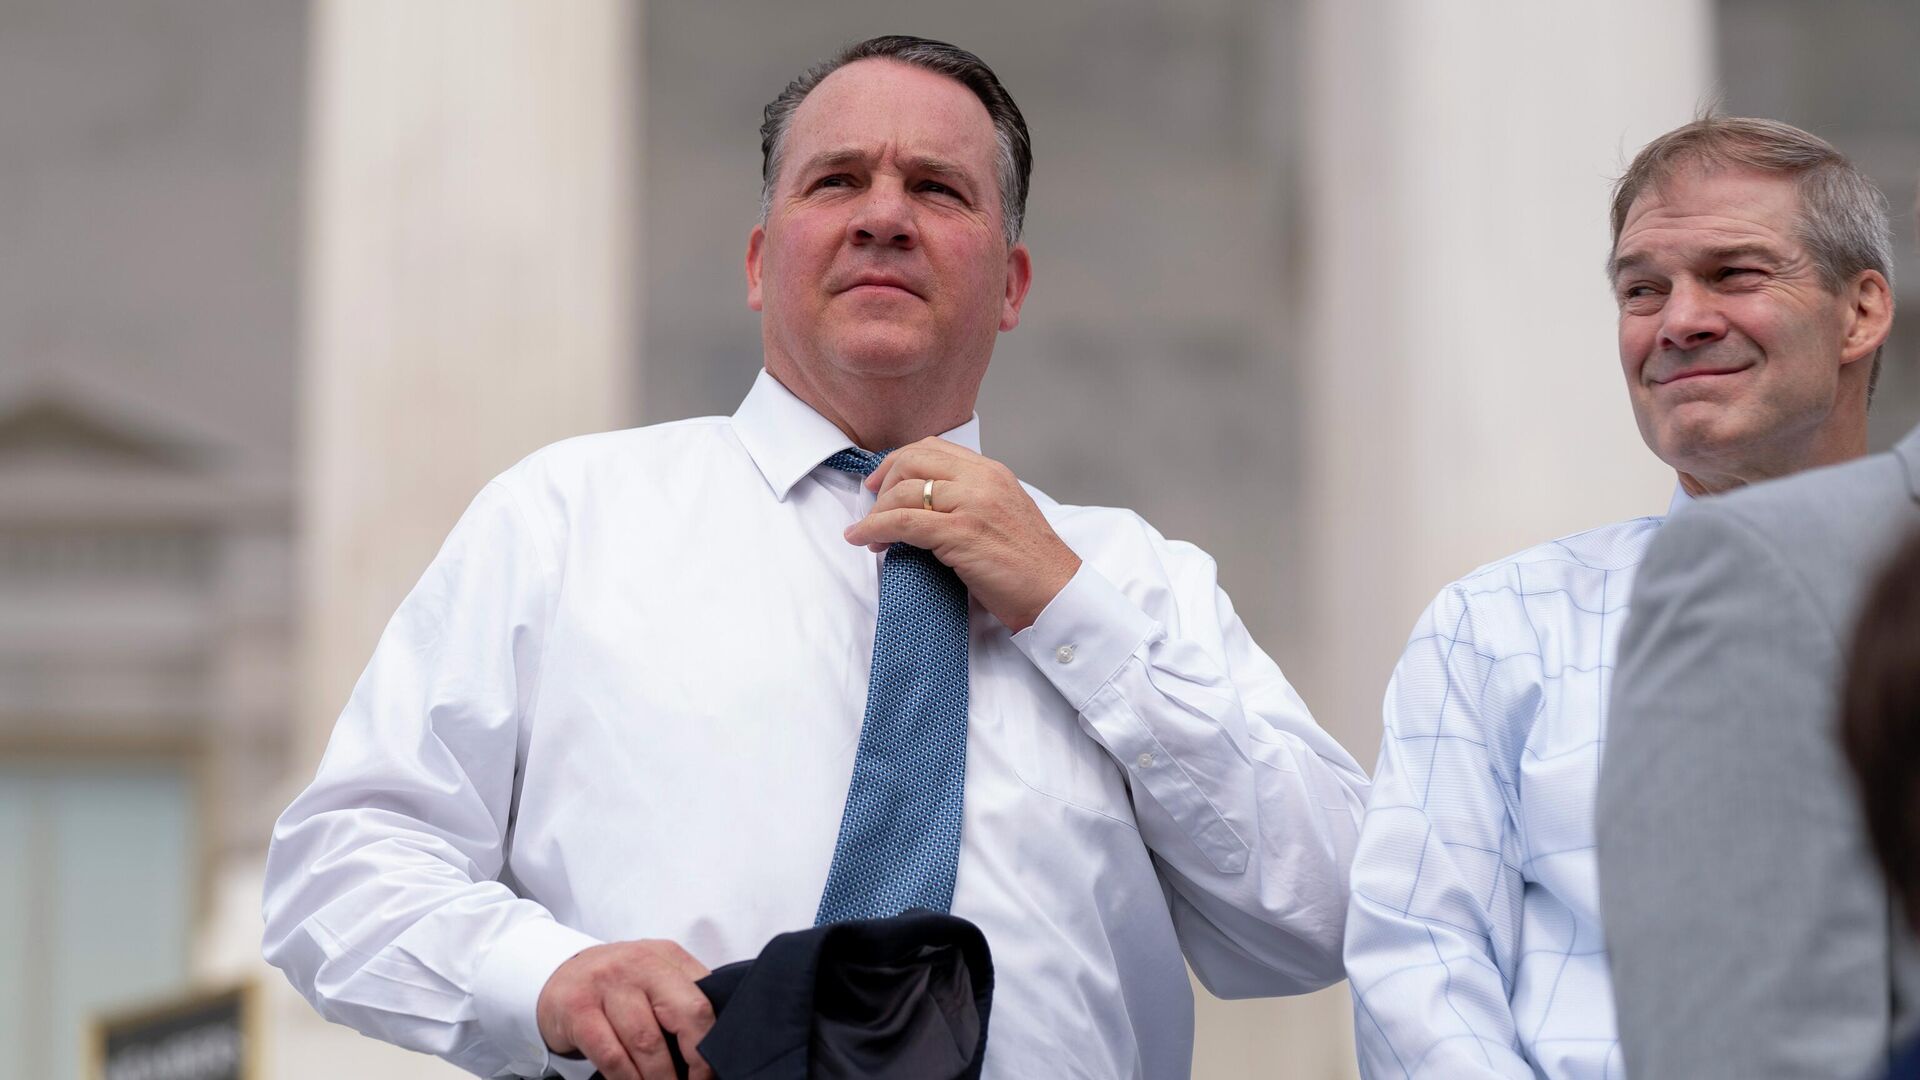 Rep. Alexander Mooney, R-W.Va., left, and Rep. Jim Jordan, R-Ohio, right, appear at a news conference on the steps of the Capitol in Washington, July 29, 2021. Mooney faces Rep. David McKinley, in a Republican primary on Tuesday, May 10, 2022, in West Virginia's 2nd Congressional District. - Sputnik International, 1920, 11.05.2022